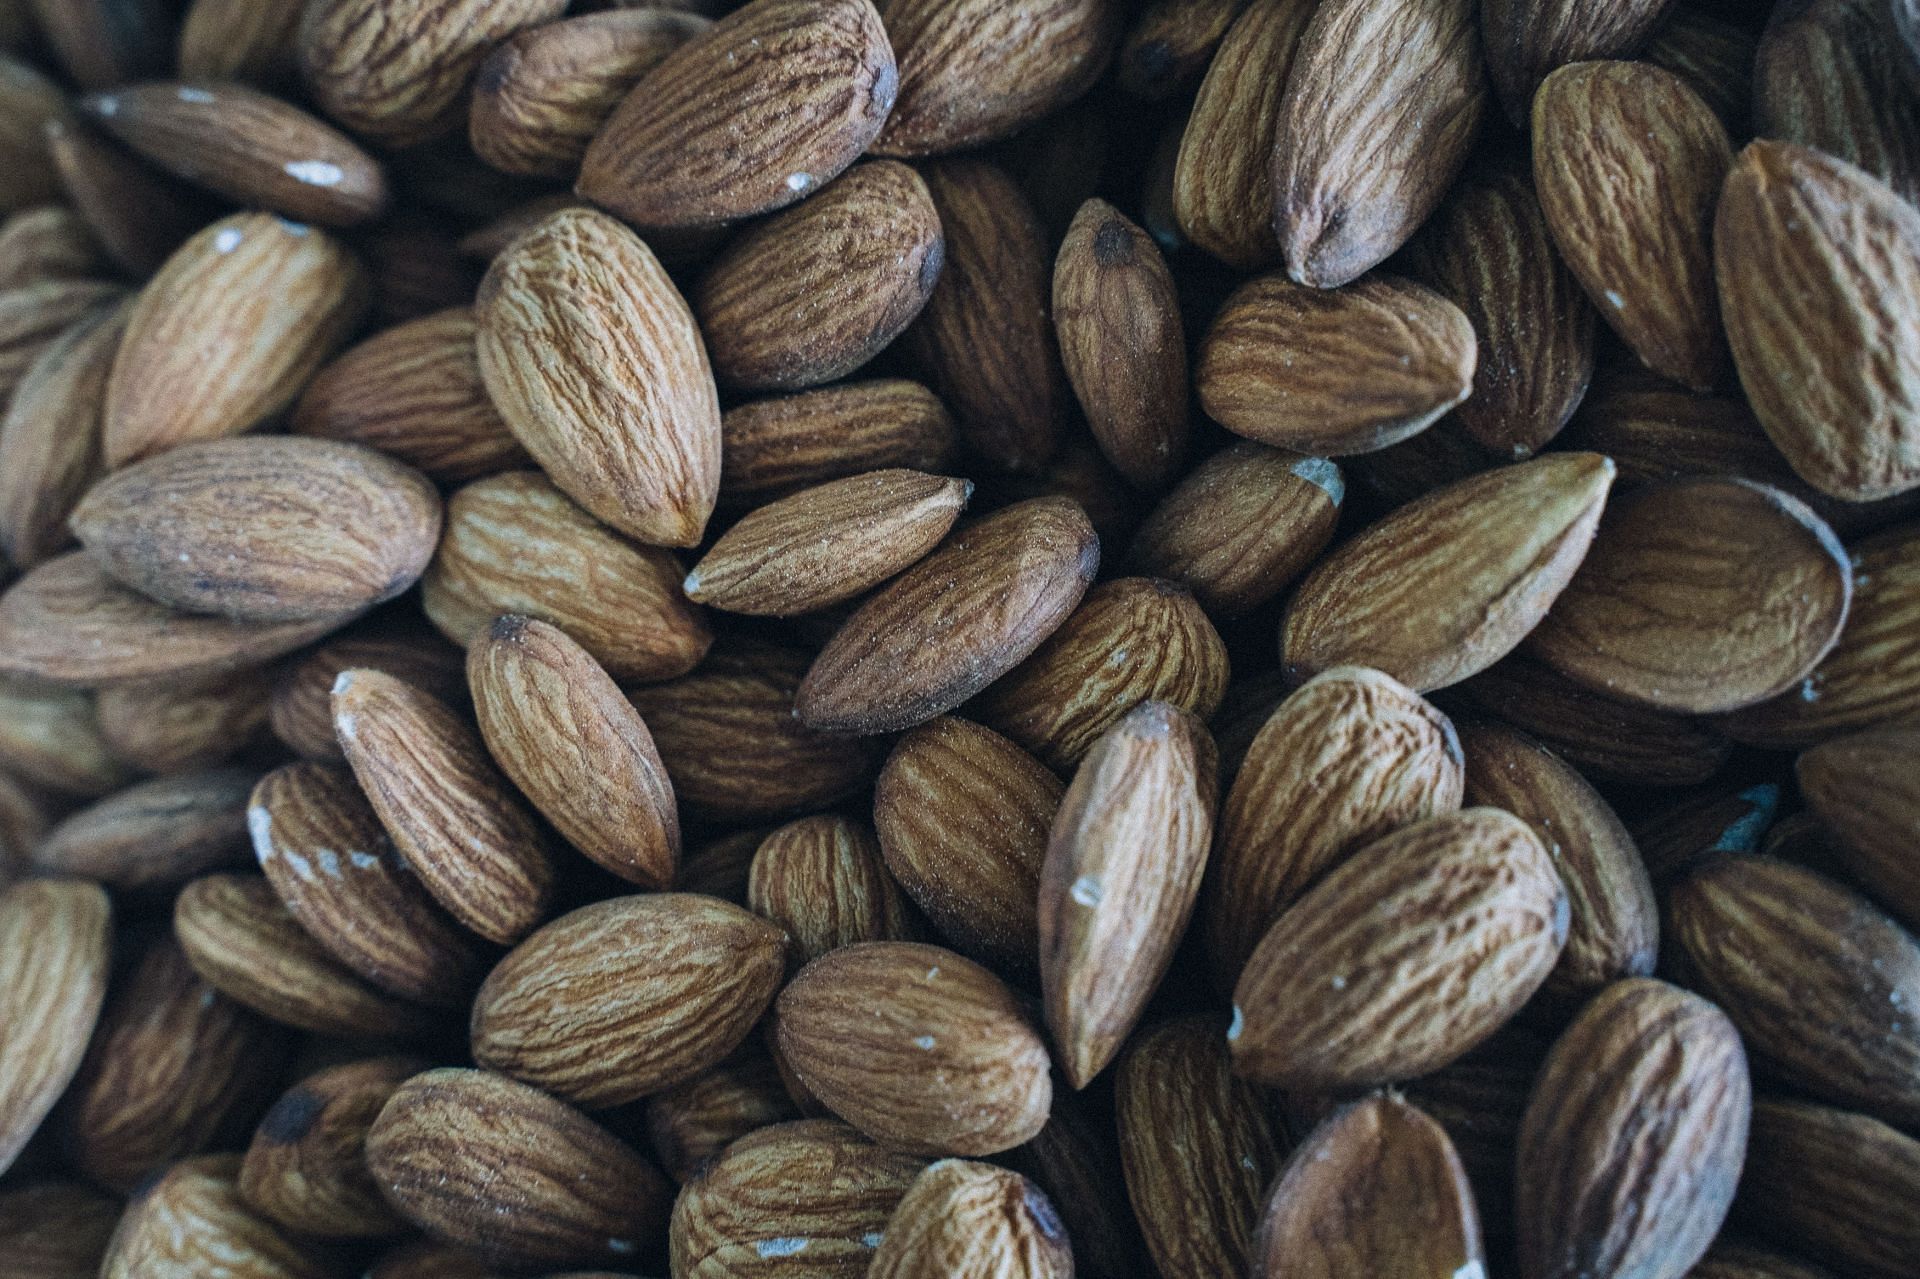 Roasted almonds are an example of minimally processed food (Image via Pexels)